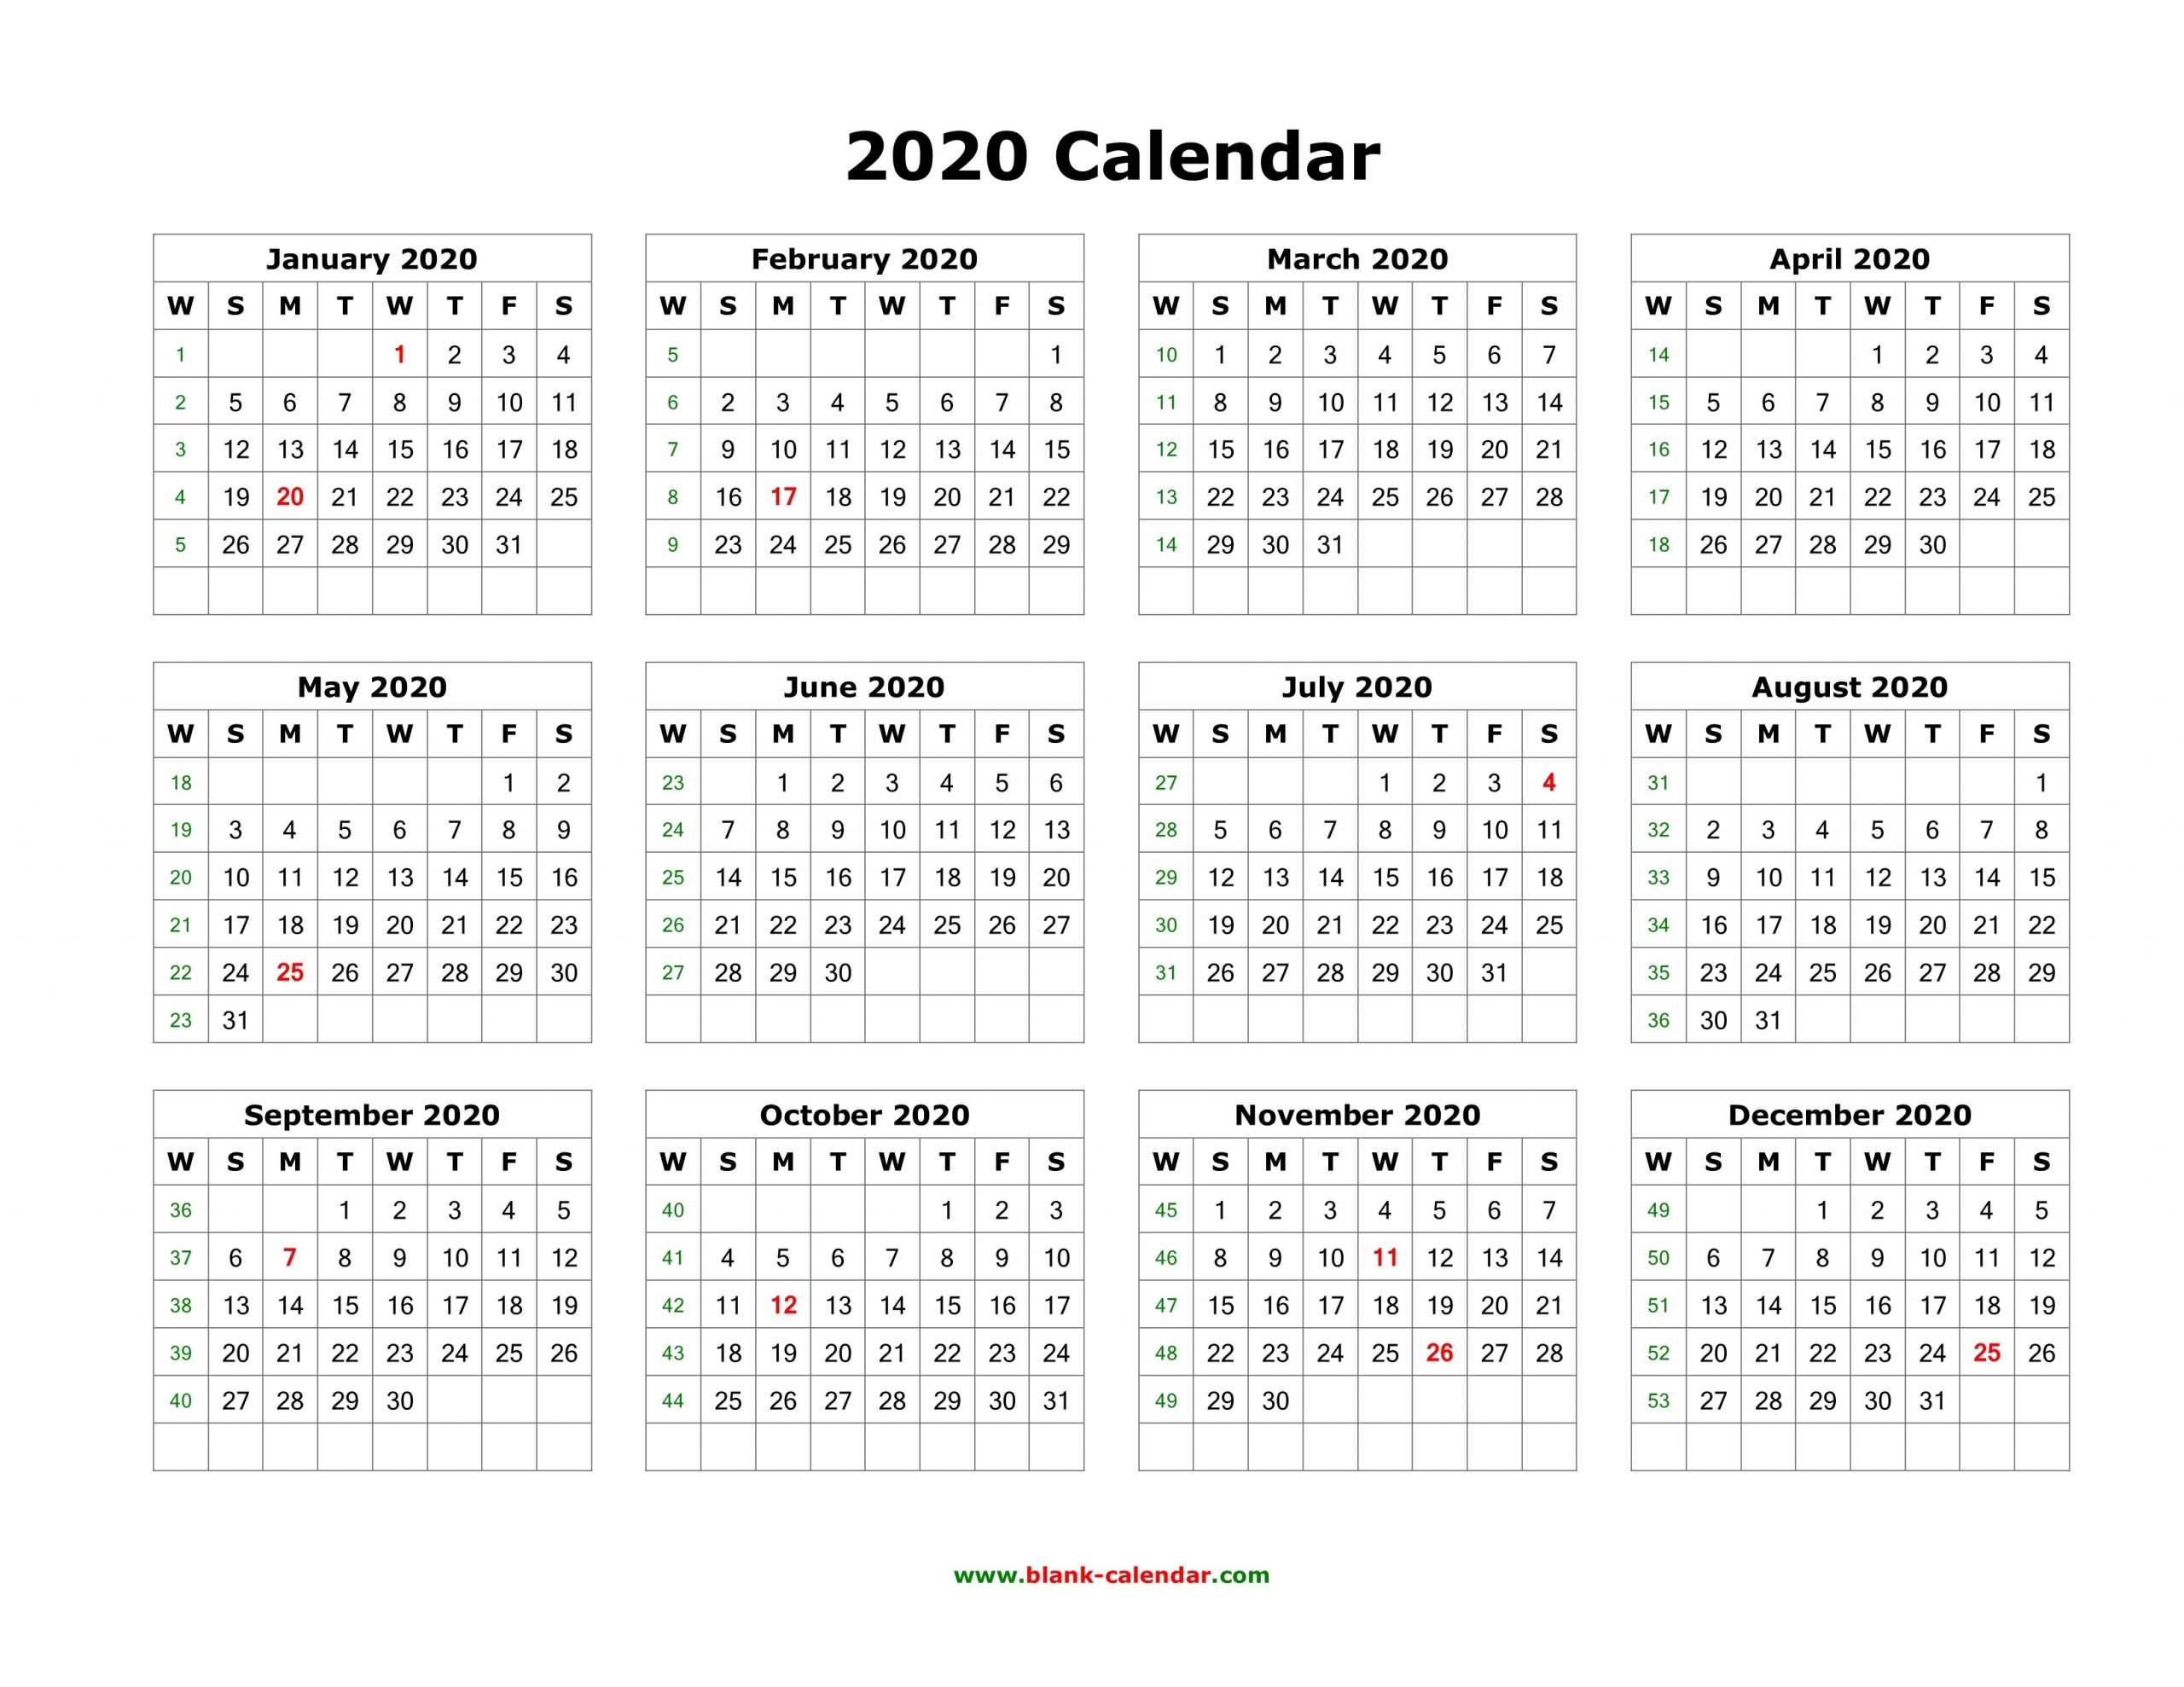 2020 Yearly Calendar Download Sunday Through Saturday | Calendar Template Printable Monthly Yearly-Sunday Through Saturday Calendar